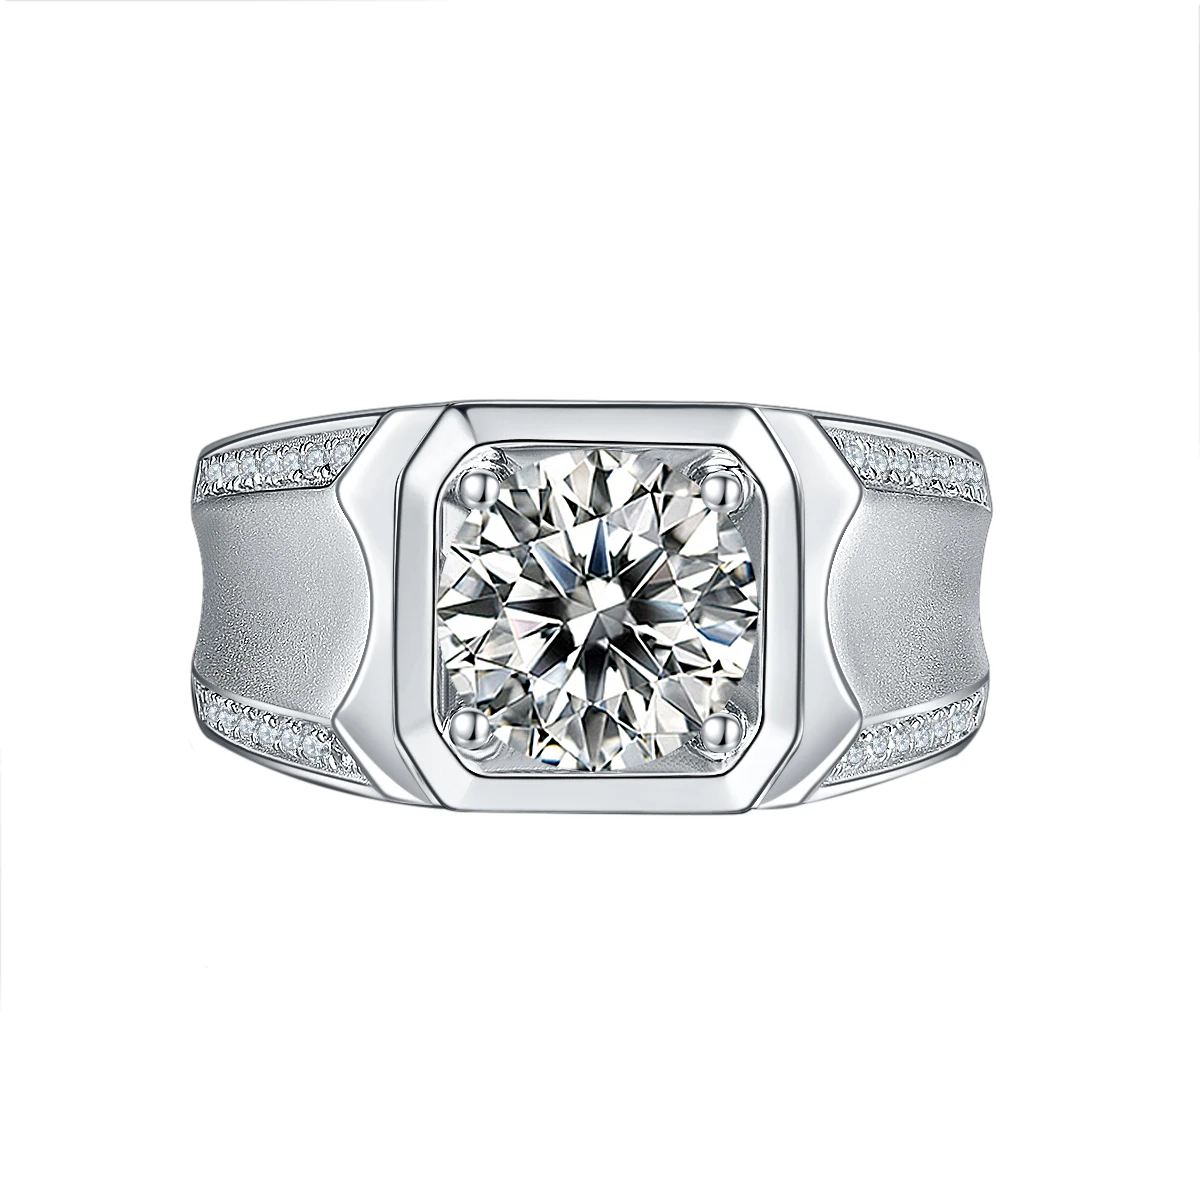 Luxury 925 Sterling Silver 1ct 2 ct 3ct D Color Moissanite Rings